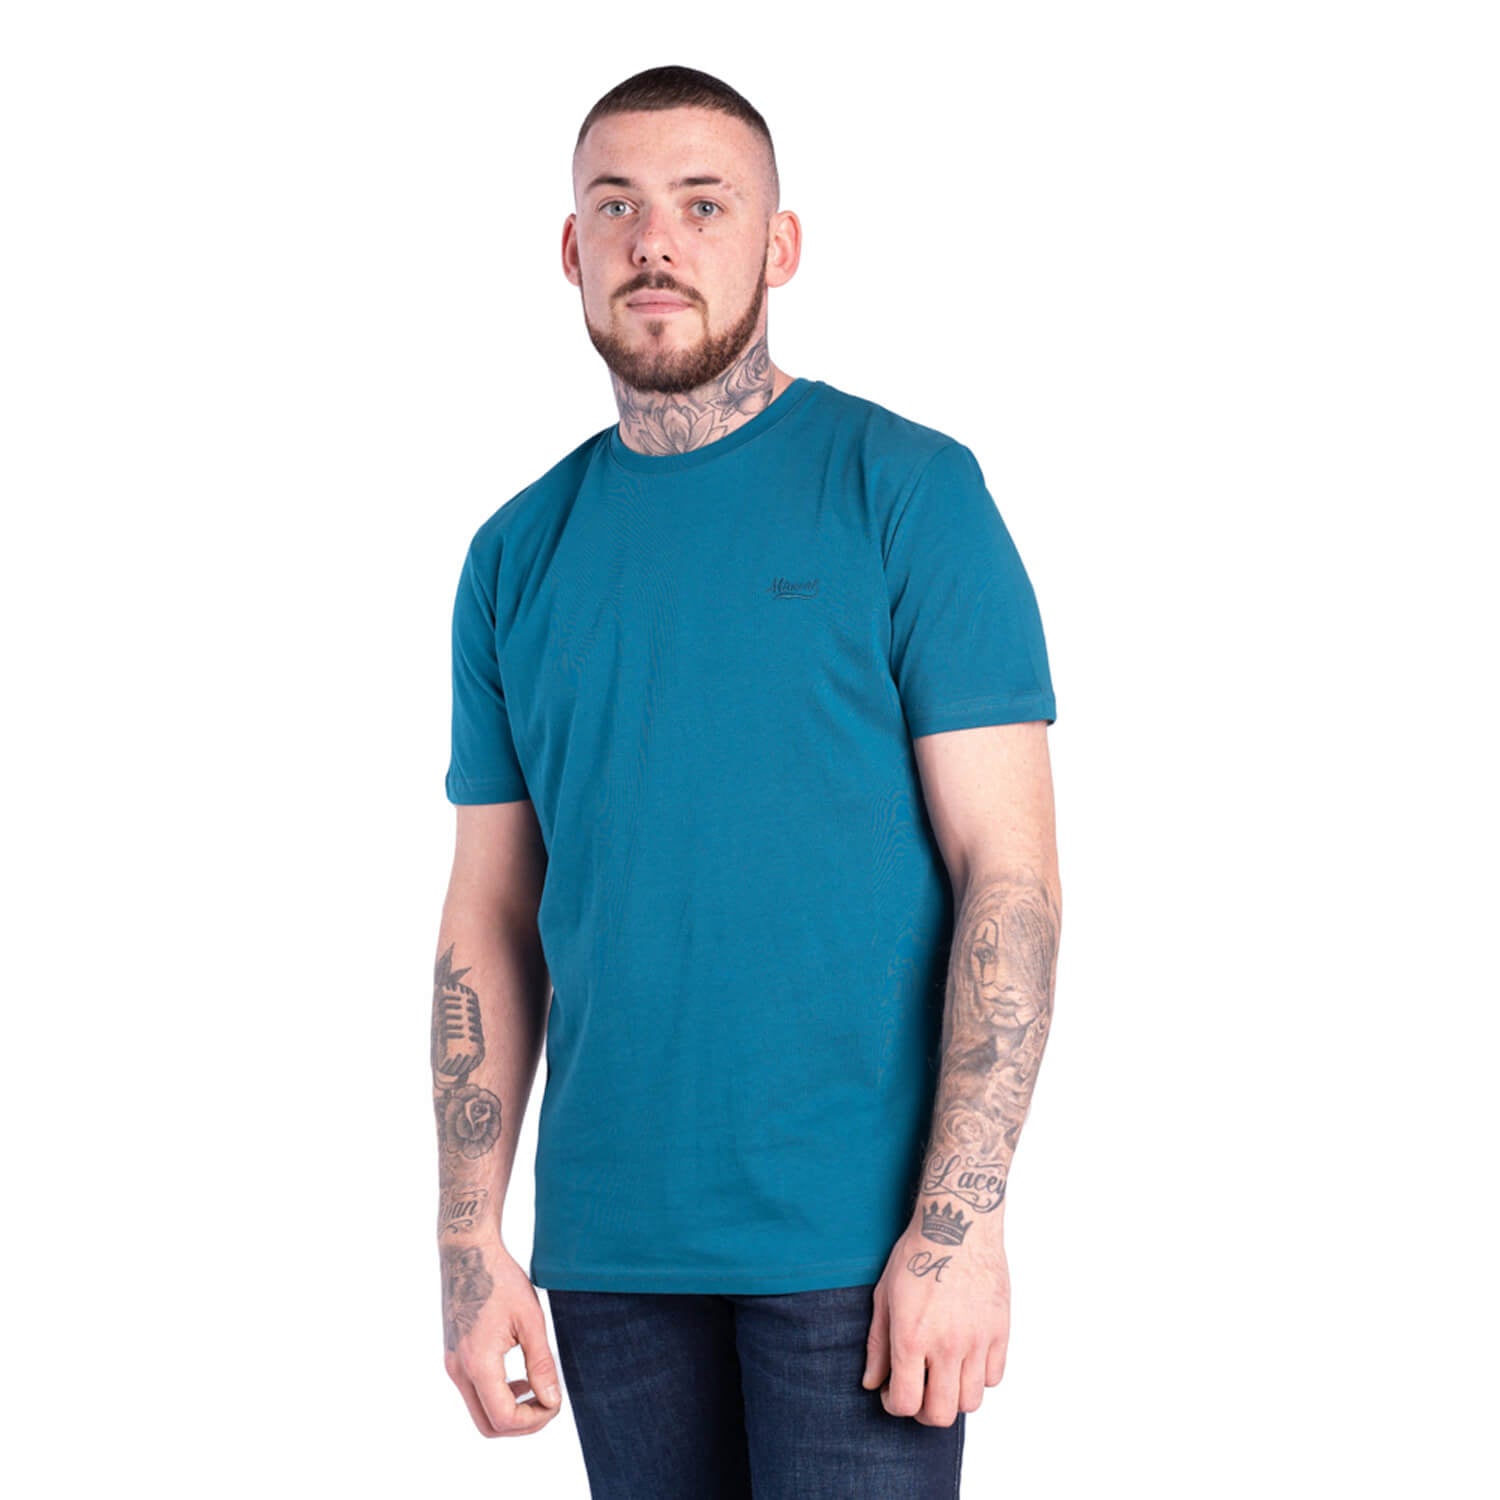 Mineral Glock Plain Tee - Teal 1 Shaws Department Stores